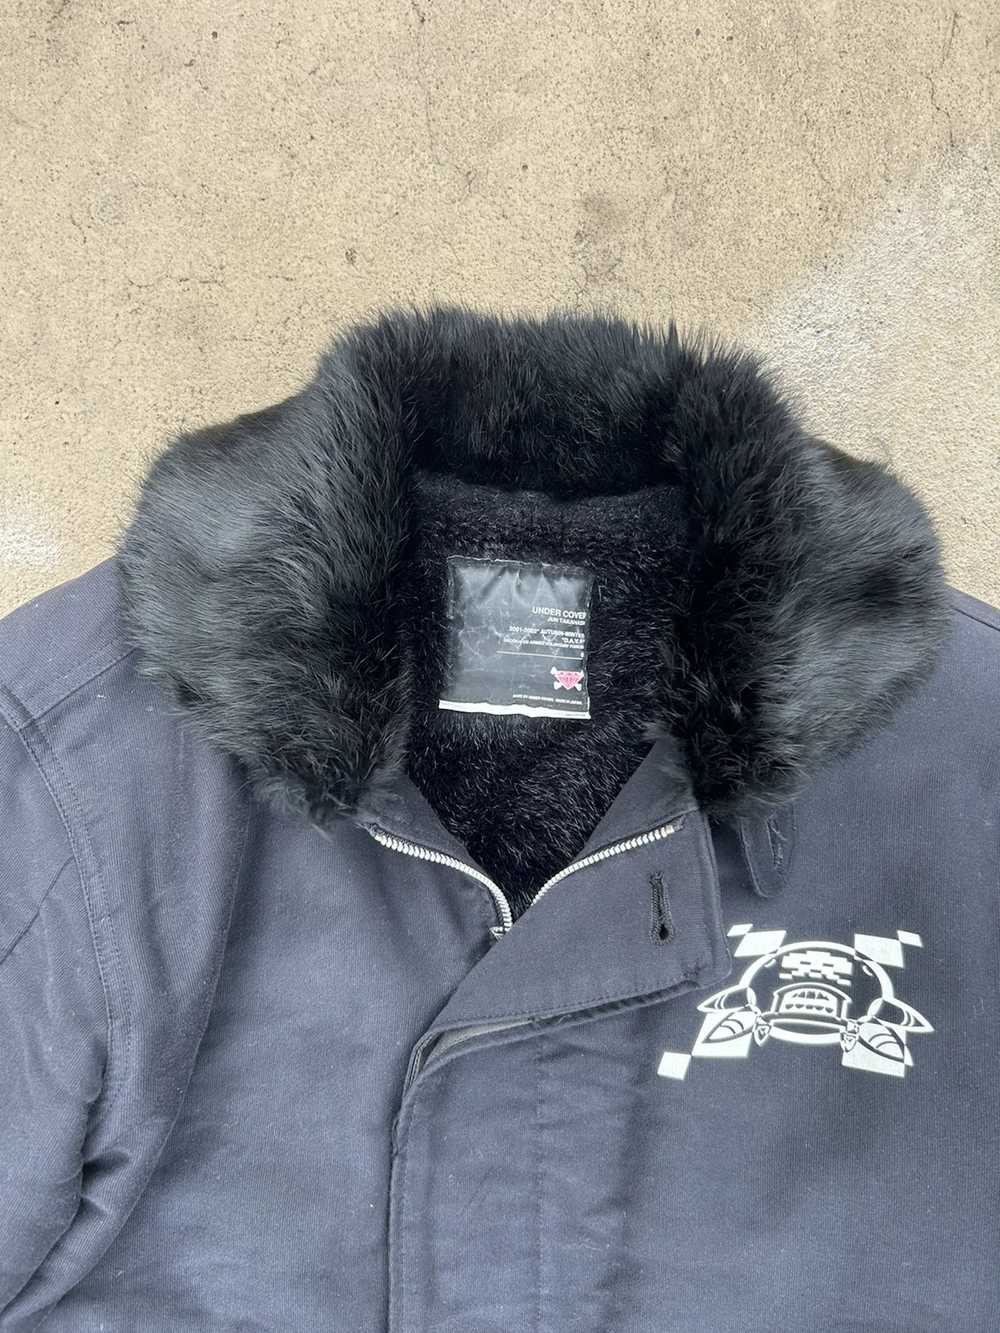 Undercover Undercover AW01 DAVF fur deck jacket - image 6